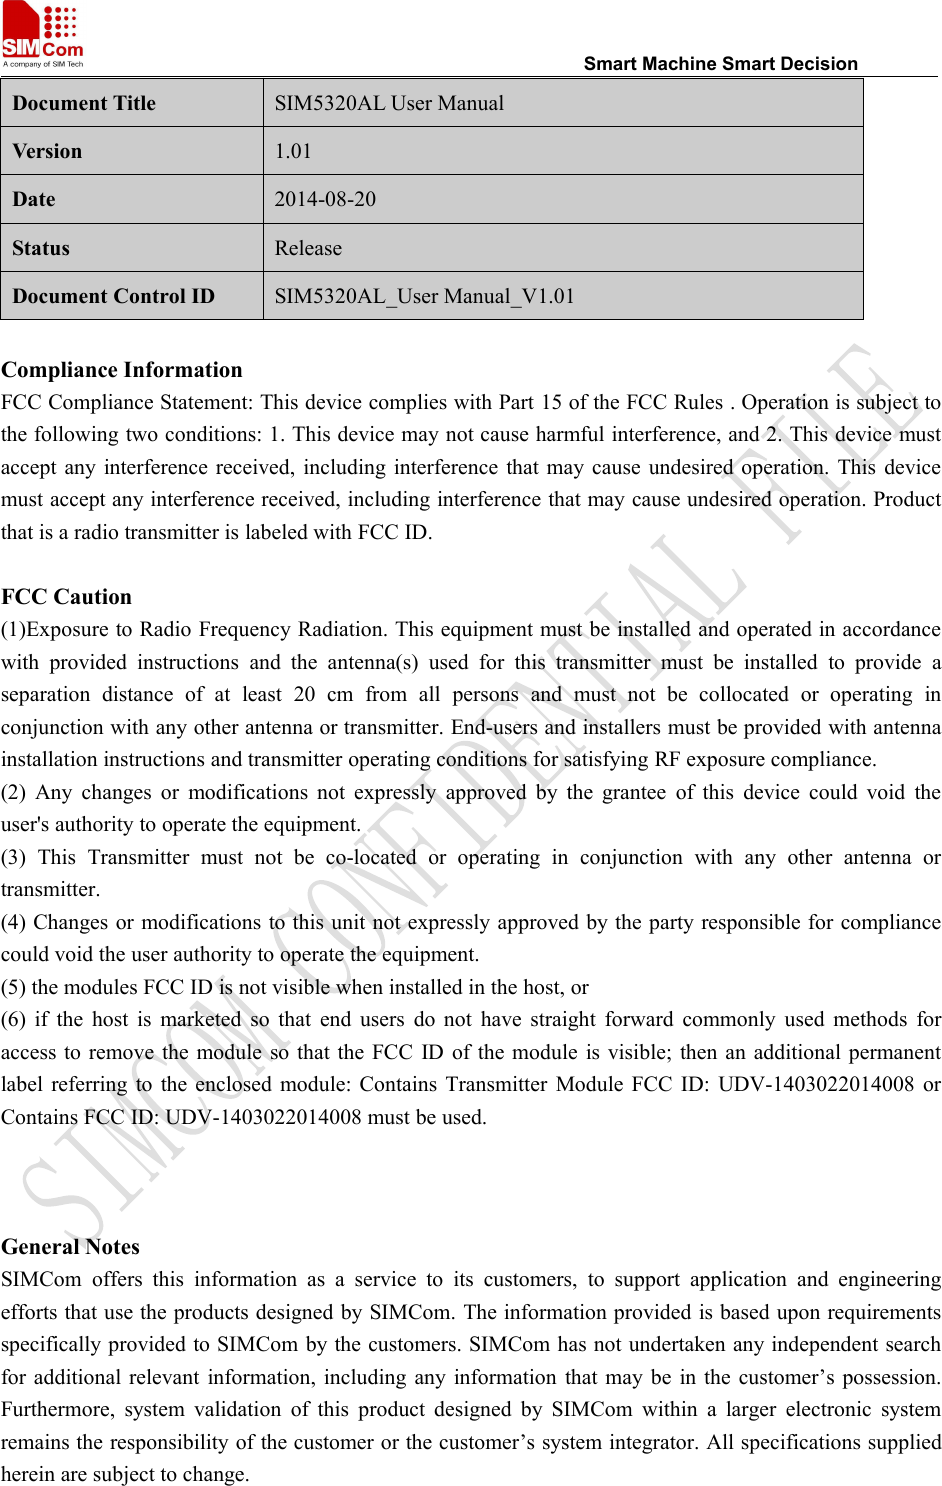 Smart Machine Smart DecisionDocument Title SIM5320AL User ManualVersion 1.01Date 2014-08-20Status ReleaseDocument Control ID SIM5320AL_User Manual_V1.01Compliance InformationFCC Compliance Statement: This device complies with Part 15 of the FCC Rules . Operation is subject tothe following two conditions: 1. This device may not cause harmful interference, and 2. This device mustaccept any interference received, including interference that may cause undesired operation. This devicemust accept any interference received, including interference that may cause undesired operation. Productthat is a radio transmitter is labeled with FCC ID.FCC Caution(1)Exposure to Radio Frequency Radiation. This equipment must be installed and operated in accordancewith provided instructions and the antenna(s) used for this transmitter must be installed to provide aseparation distance of at least 20 cm from all persons and must not be collocated or operating inconjunction with any other antenna or transmitter. End-users and installers must be provided with antennainstallation instructions and transmitter operating conditions for satisfying RF exposure compliance.(2) Any changes or modifications not expressly approved by the grantee of this device could void theuser&apos;s authority to operate the equipment.(3) This Transmitter must not be co-located or operating in conjunction with any other antenna ortransmitter.(4) Changes or modifications to this unit not expressly approved by the party responsible for compliancecould void the user authority to operate the equipment.(5) the modules FCC ID is not visible when installed in the host, or(6) if the host is marketed so that end users do not have straight forward commonly used methods foraccess to remove the module so that the FCC ID of the module is visible; then an additional permanentlabel referring to the enclosed module: Contains Transmitter Module FCC ID: UDV-1403022014008 orContains FCC ID: UDV-1403022014008 must be used.General NotesSIMCom offers this information as a service to its customers, to support application and engineeringefforts that use the products designed by SIMCom. The information provided is based upon requirementsspecifically provided to SIMCom by the customers. SIMCom has not undertaken any independent searchfor additional relevant information, including any information that may be in the customer’s possession.Furthermore, system validation of this product designed by SIMCom within a larger electronic systemremains the responsibility of the customer or the customer’s system integrator. All specifications suppliedherein are subject to change.